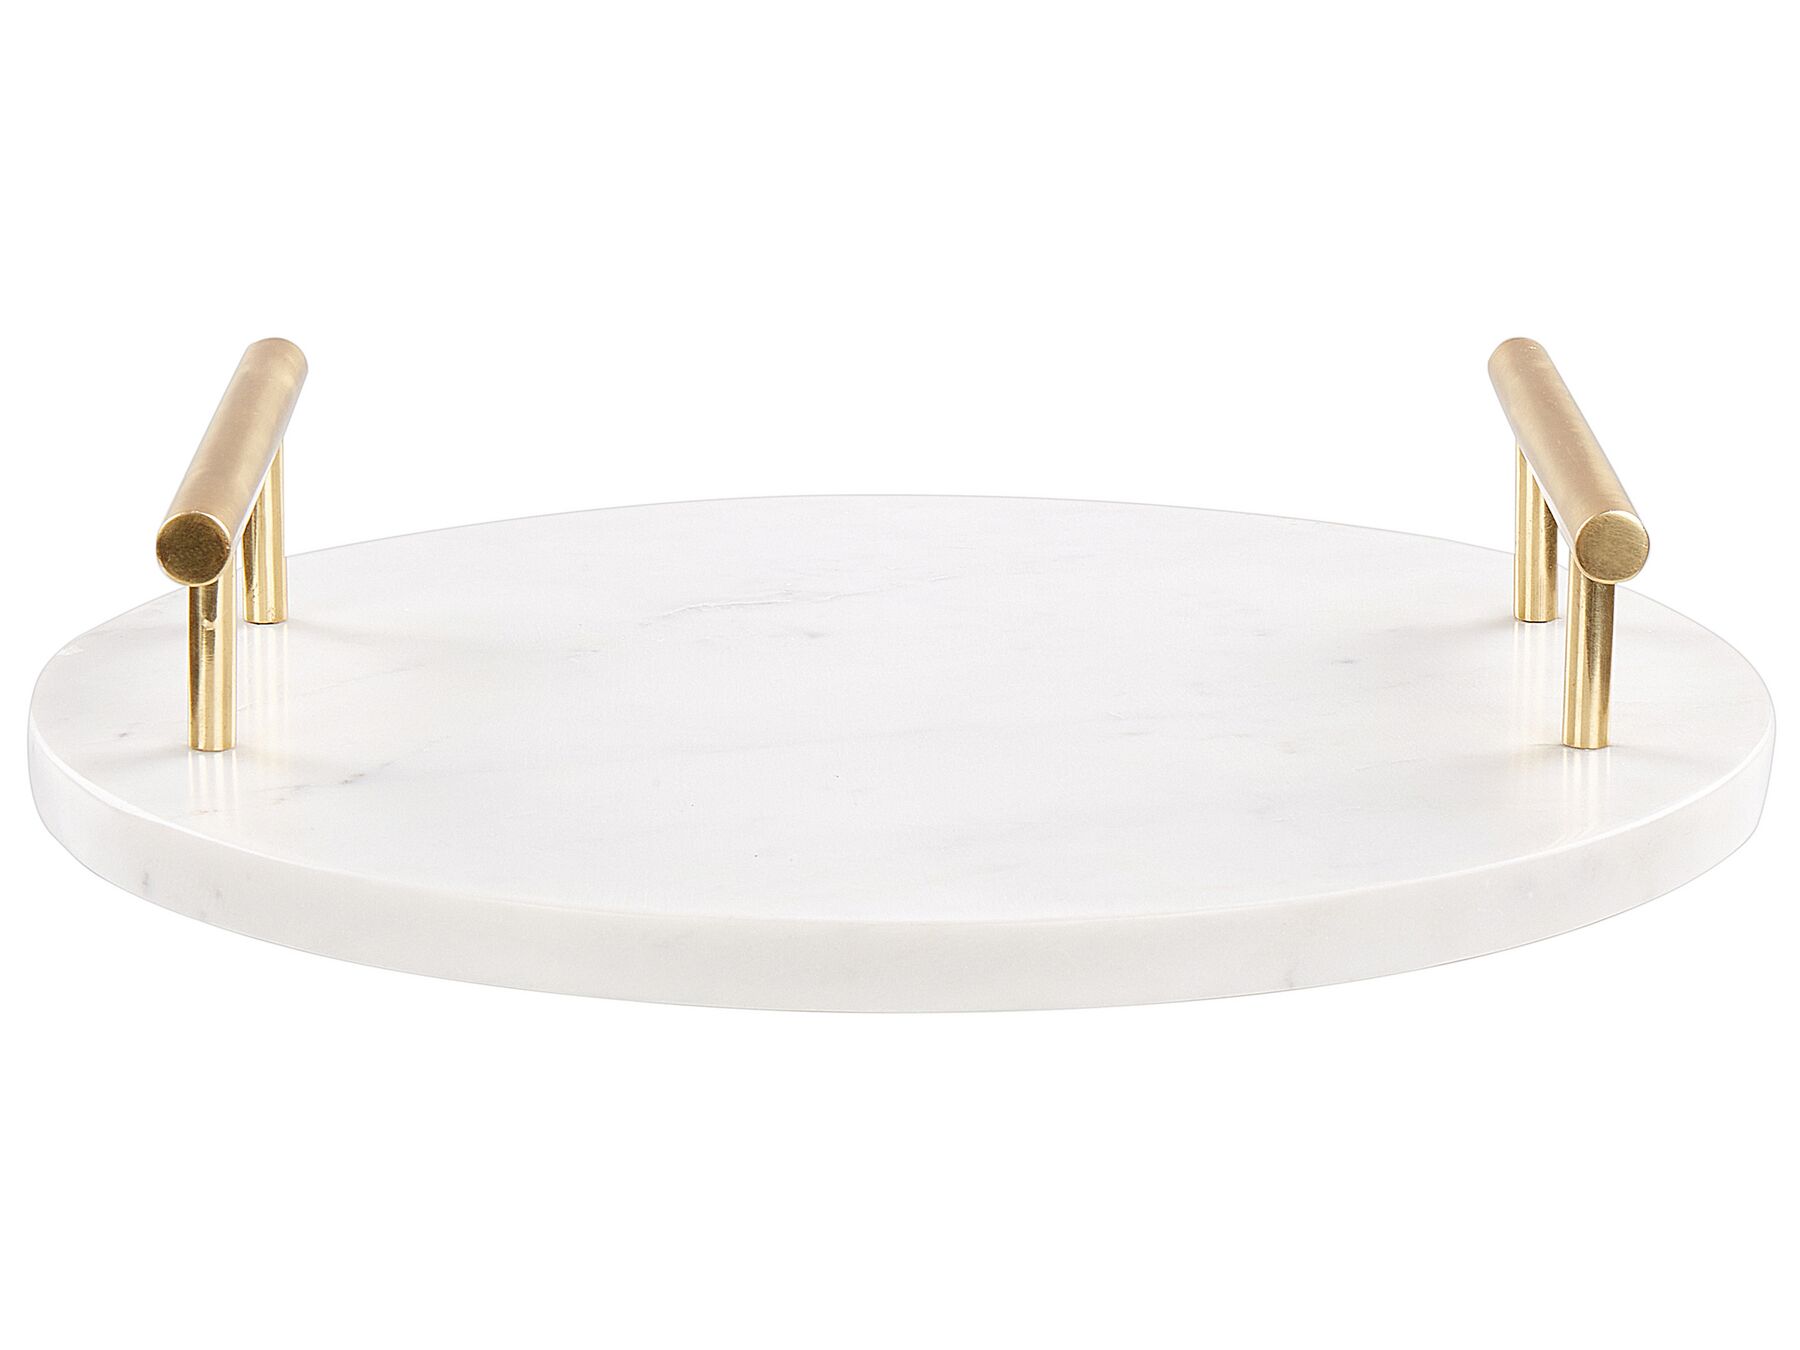 Marble Serving Tray White with Gold Handles ARGOS_910950